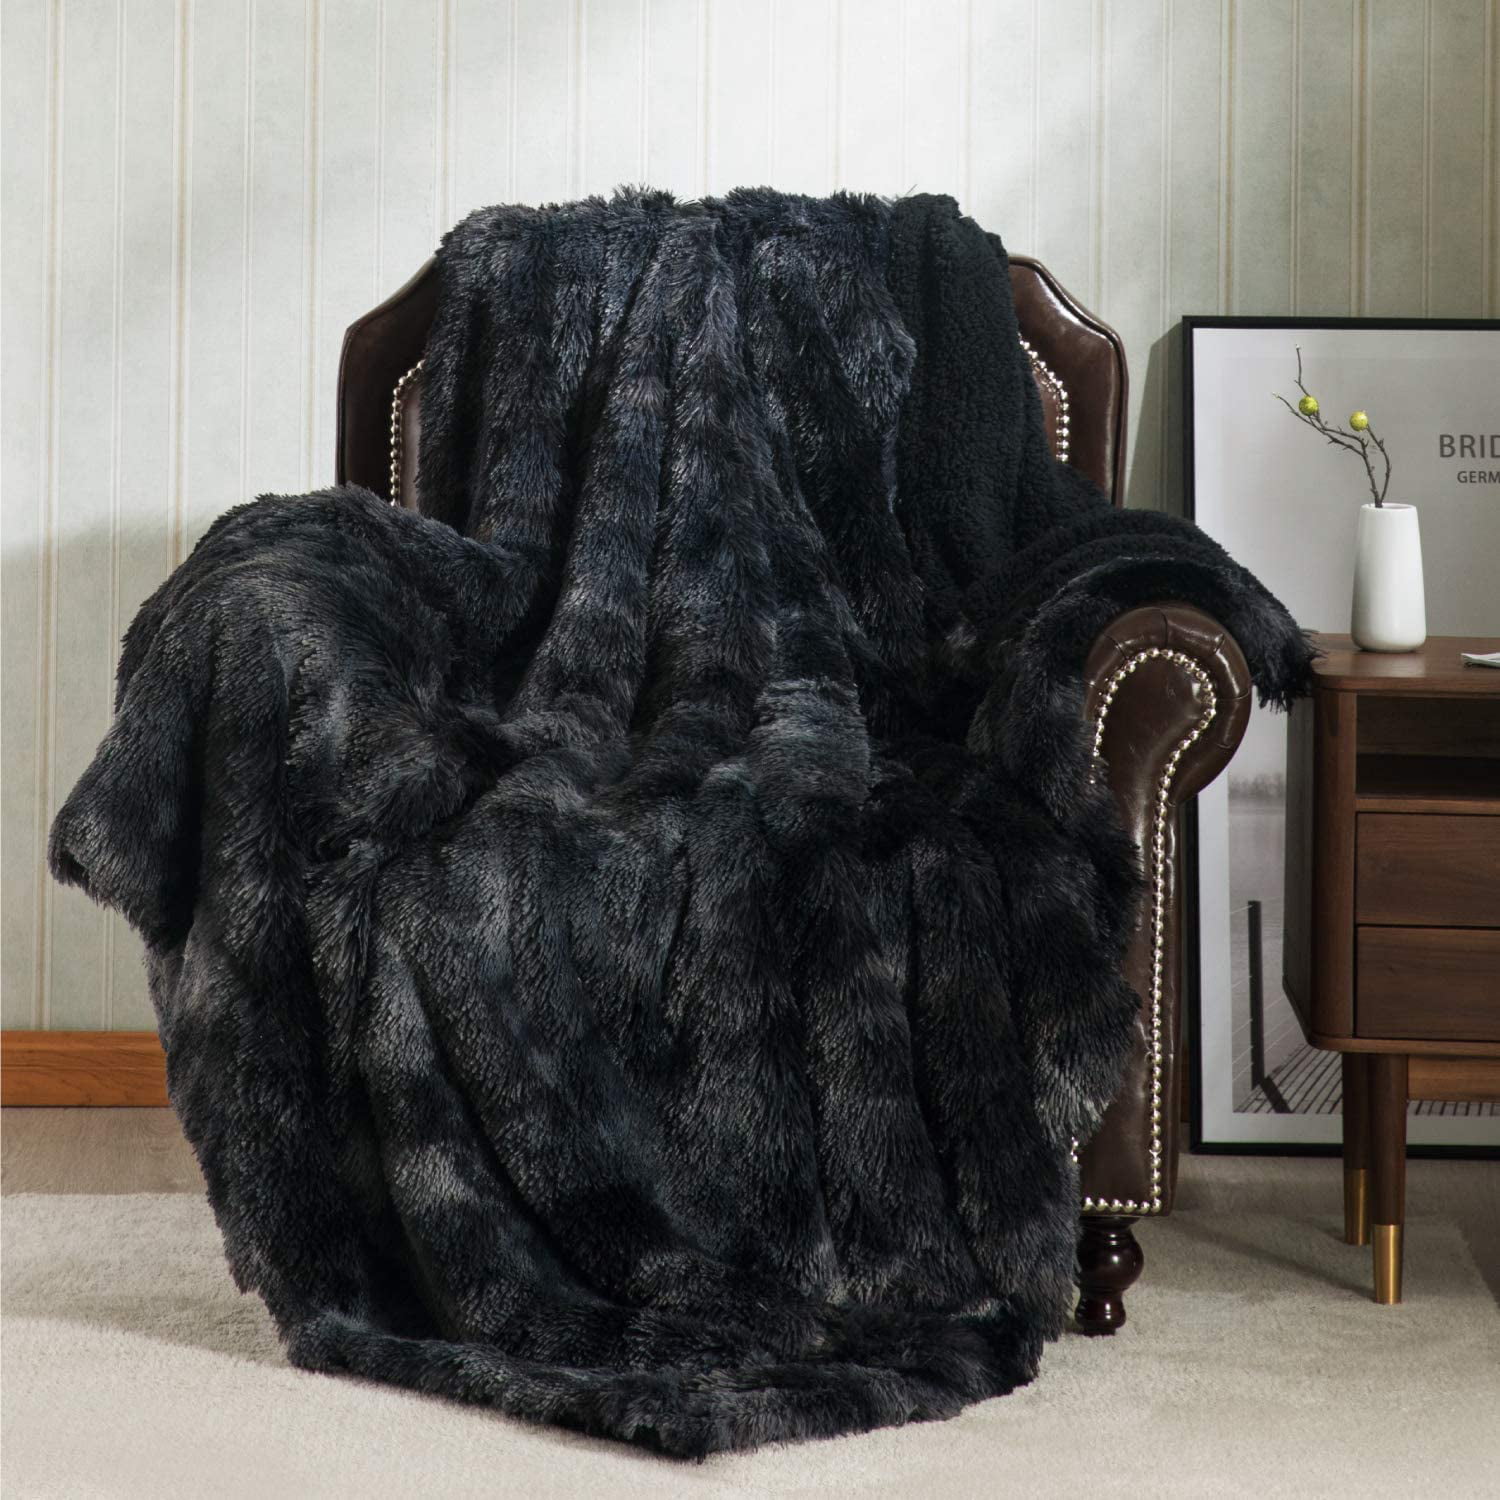 60 x 90 Super Soft Fuzzy Light Weight Cozy Warm Plush Blanket for Bed Couch Chair Fall Winter Spring Living Room ALAZA Sunflowers Black Faux Fur Throw Blanket 